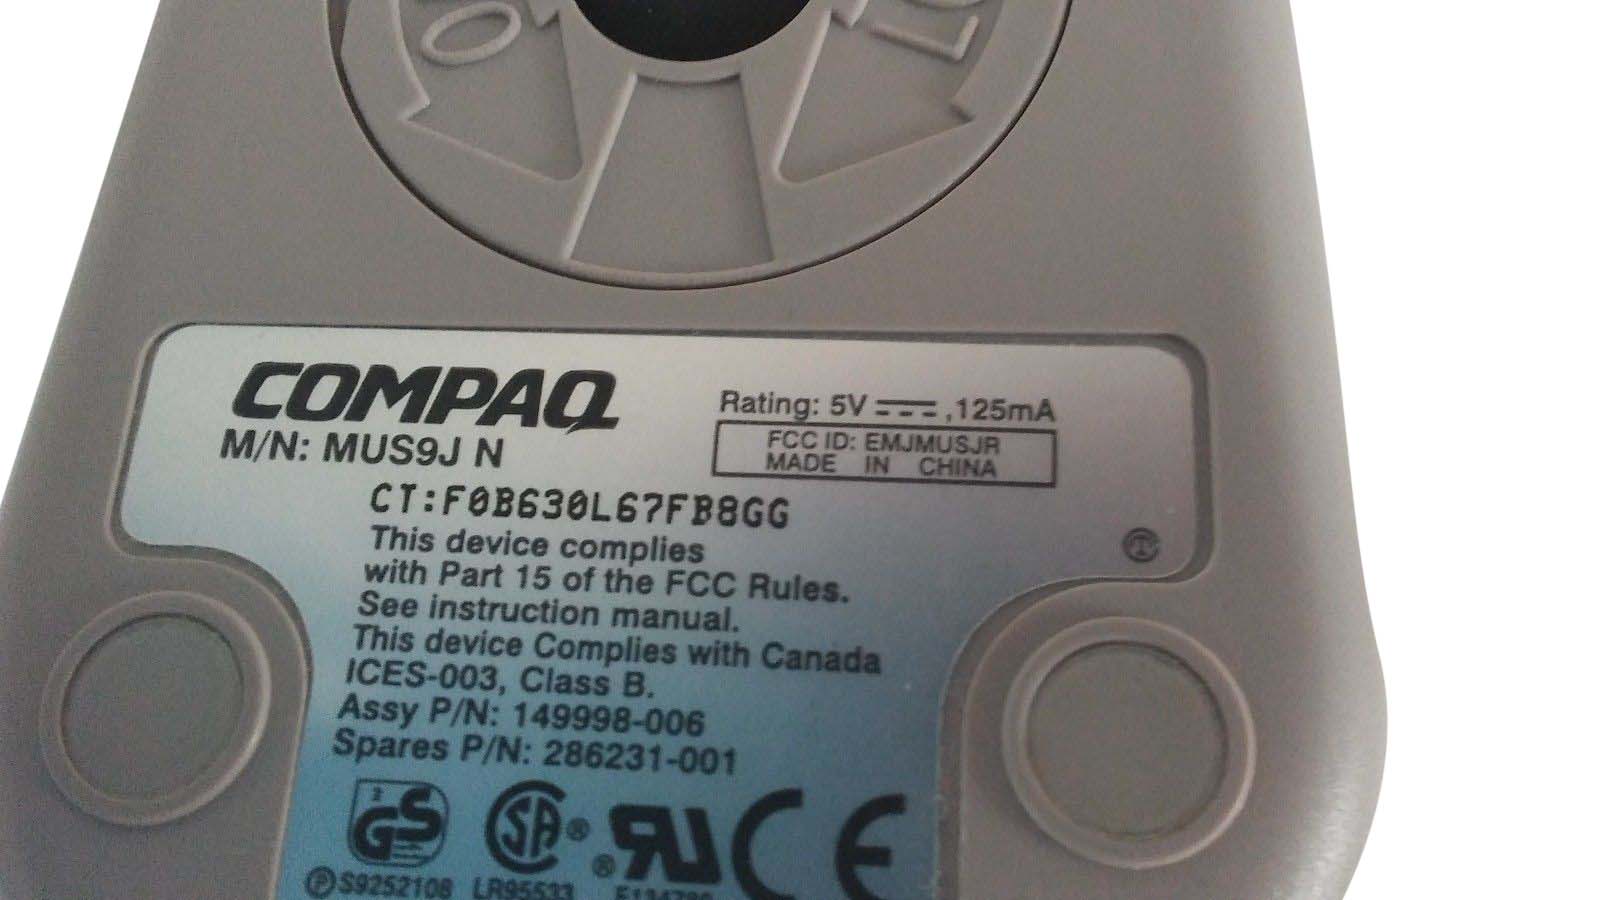 Compaq 2-button PS/2 Mouse (Ivory)